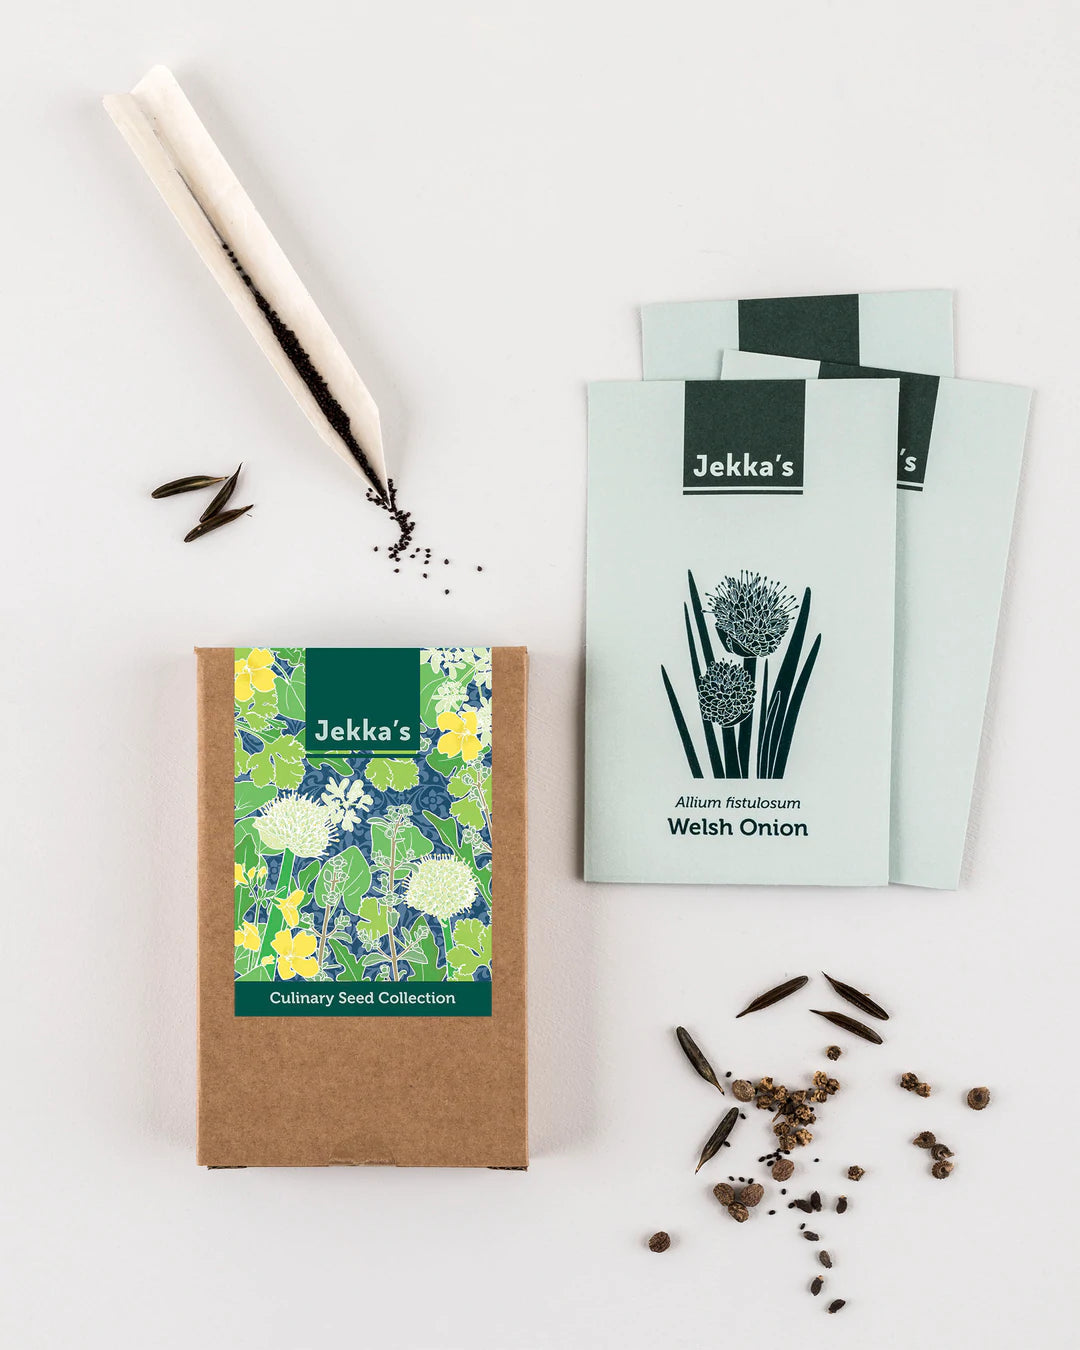 Jekka’s Culinary Seed Collection - The Bristol Artisan Handmade Sustainable Gifts and Homewares.